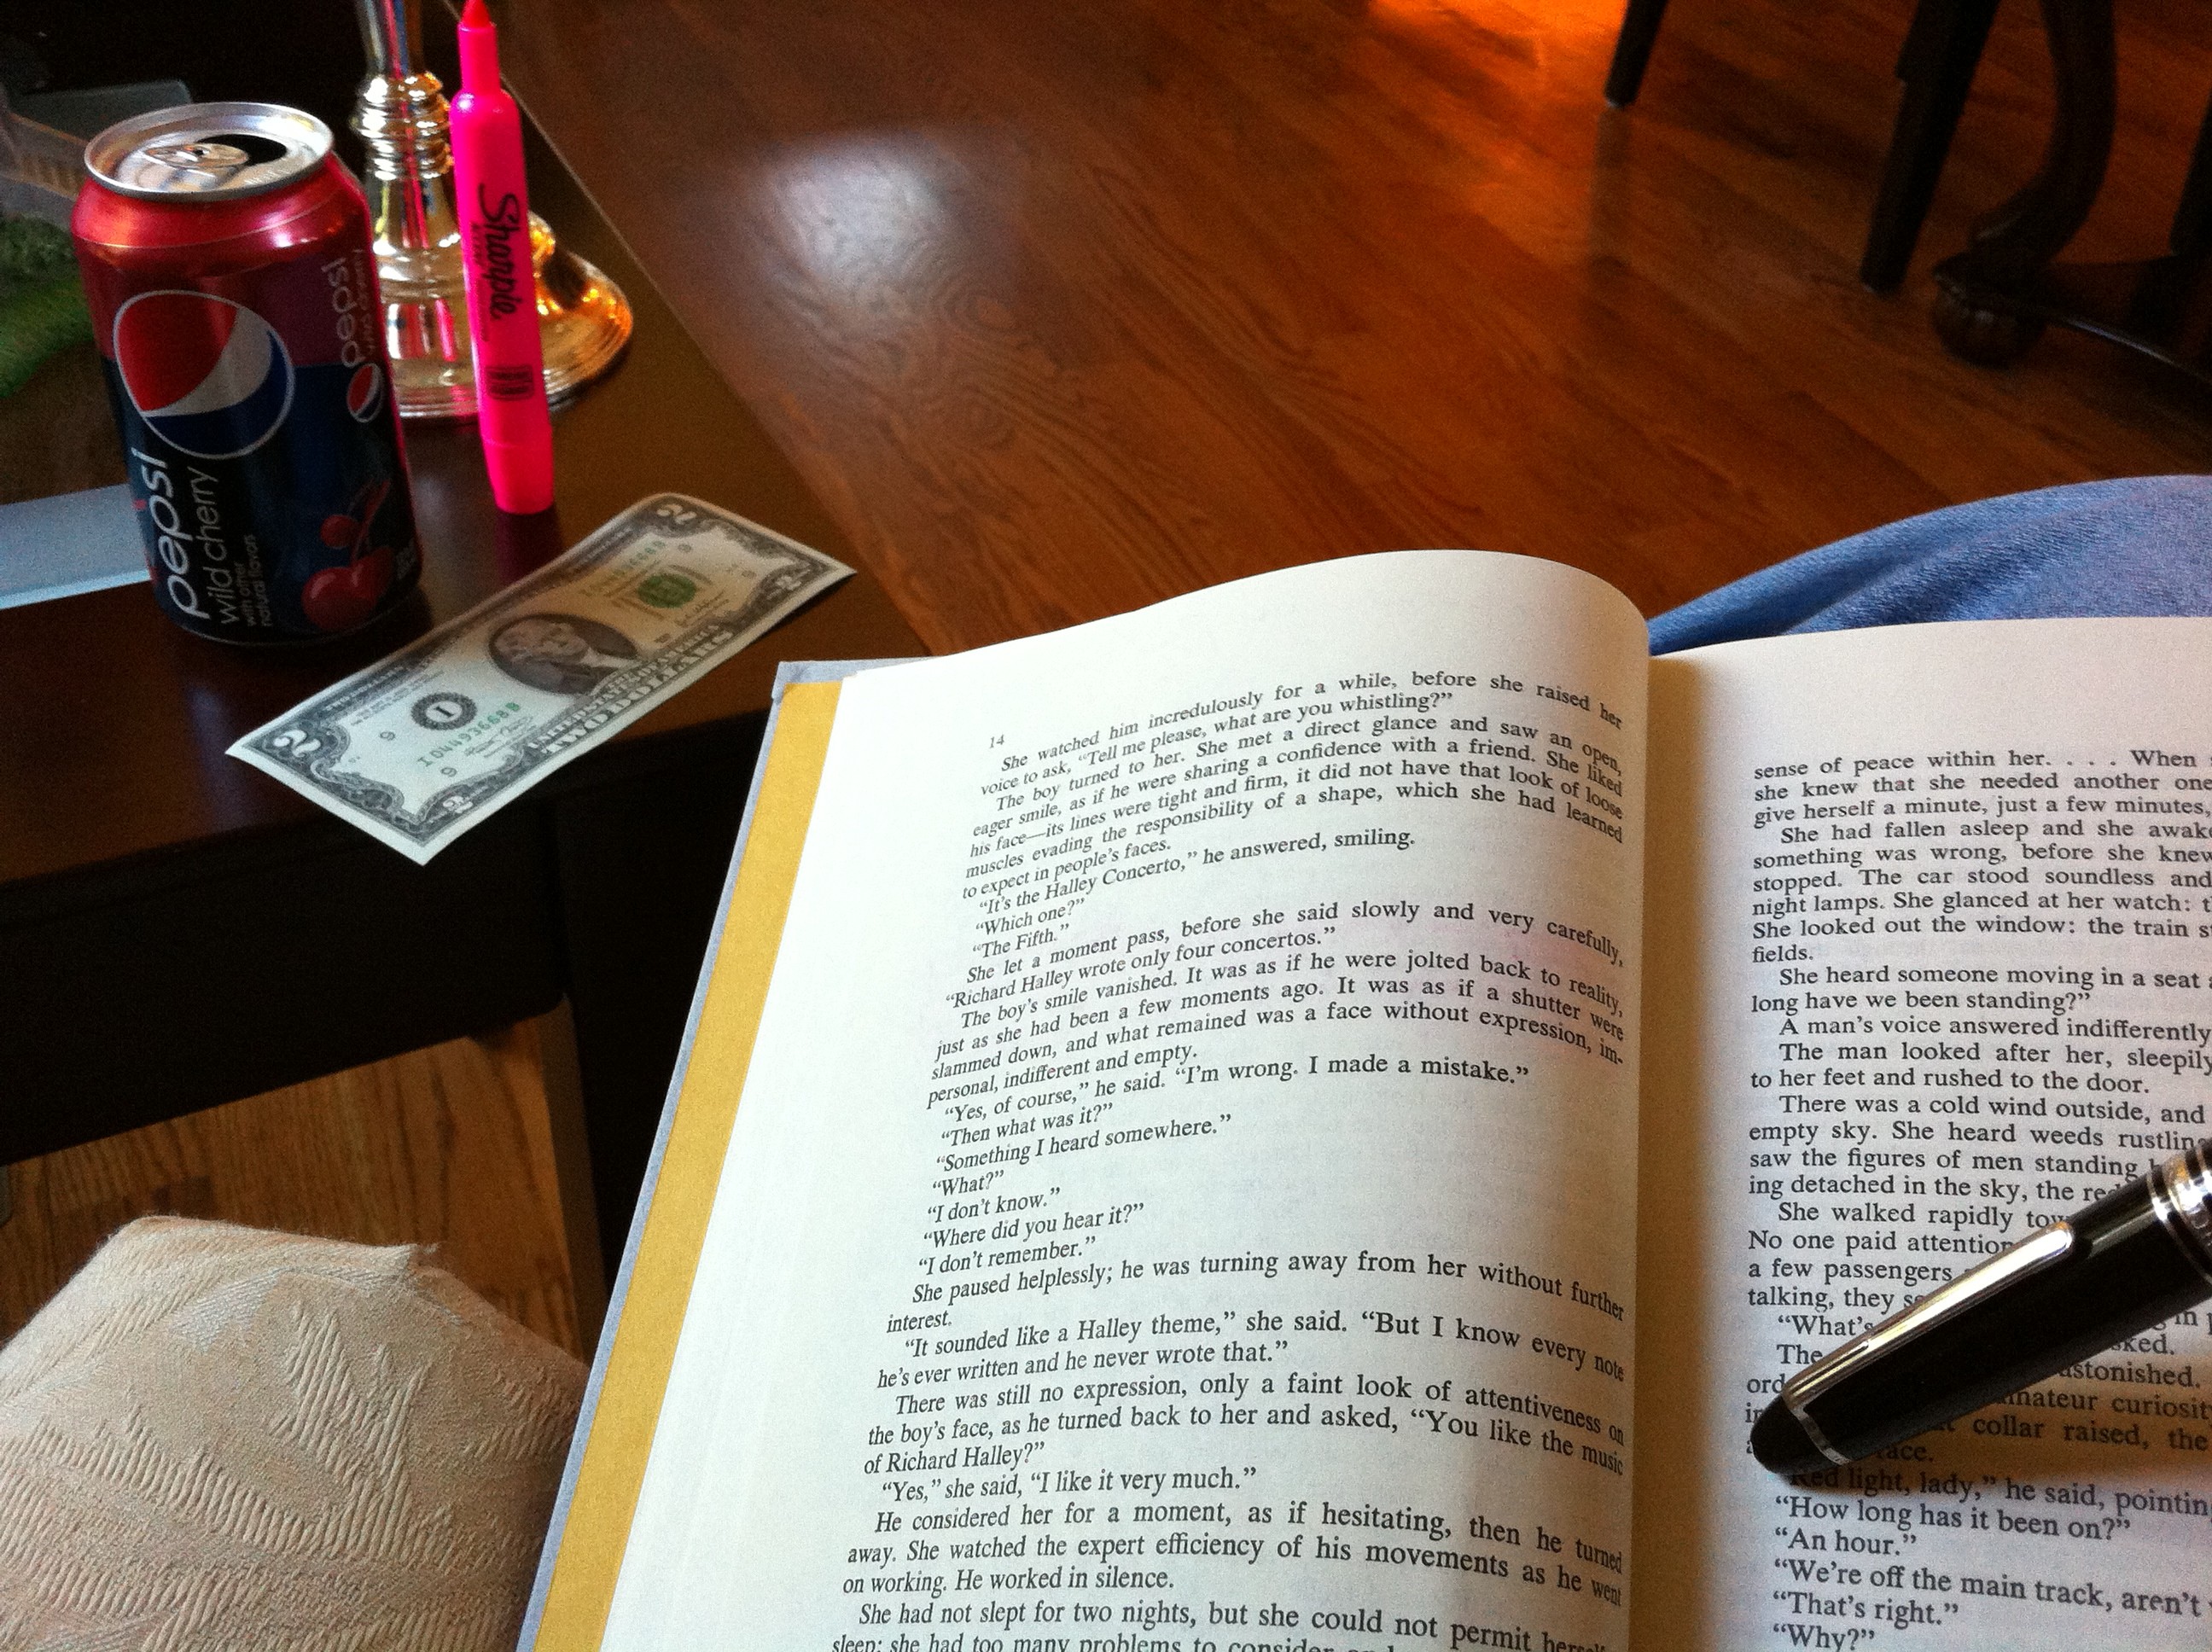 Reading Atlas Shrugged with a Cherry Pepsi